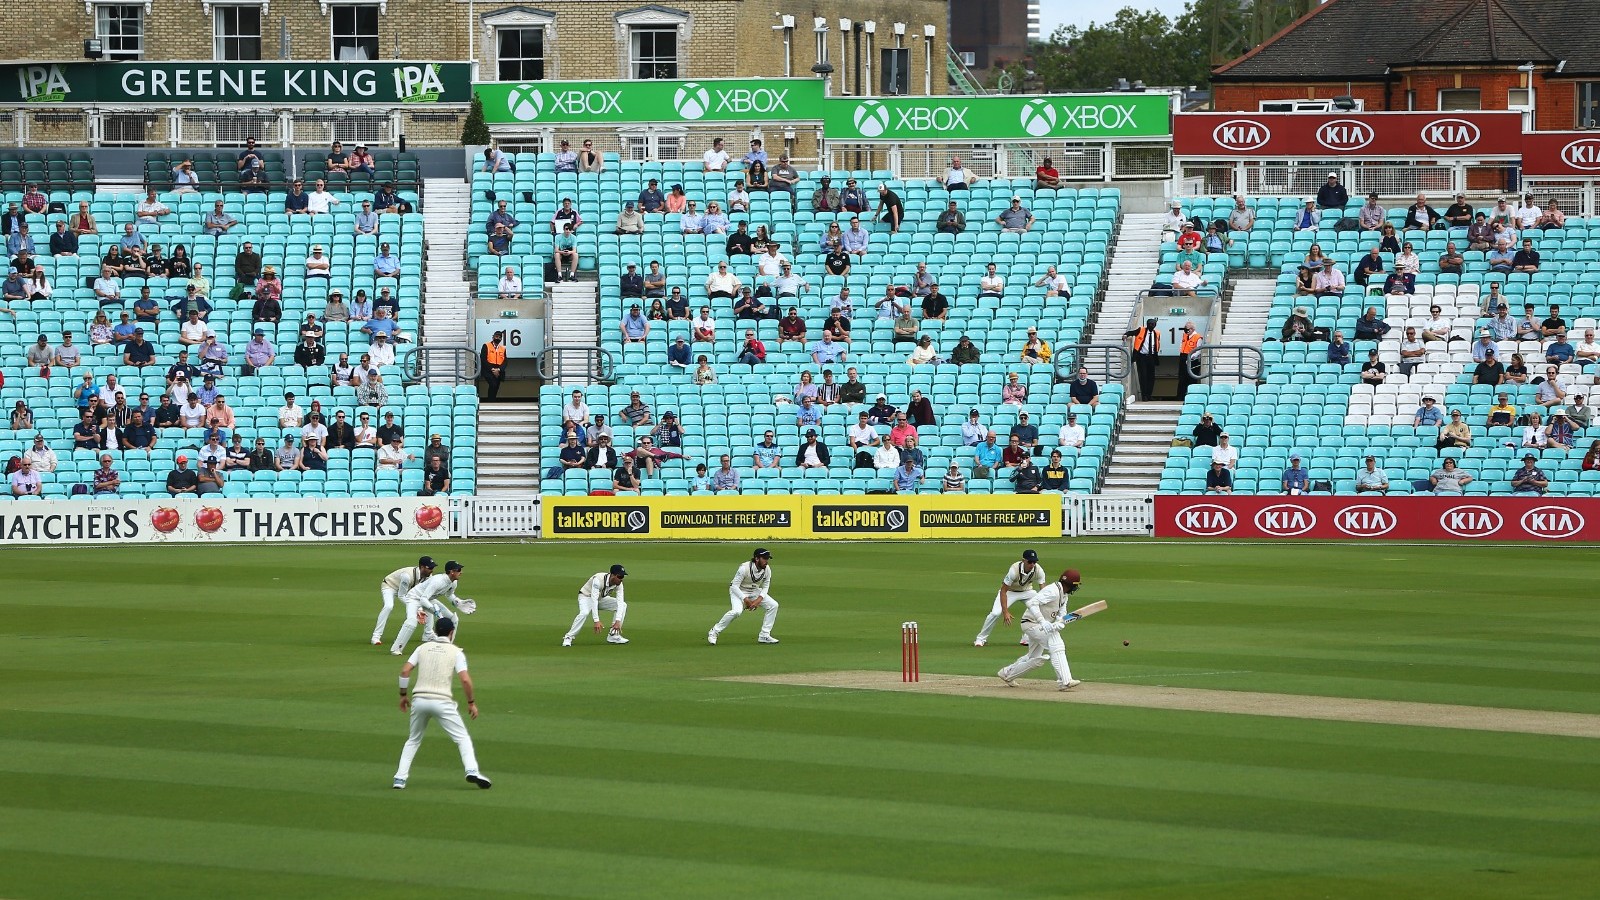 Spectators allowed to watch Surrey versus Middlesex pre-season match at The Oval